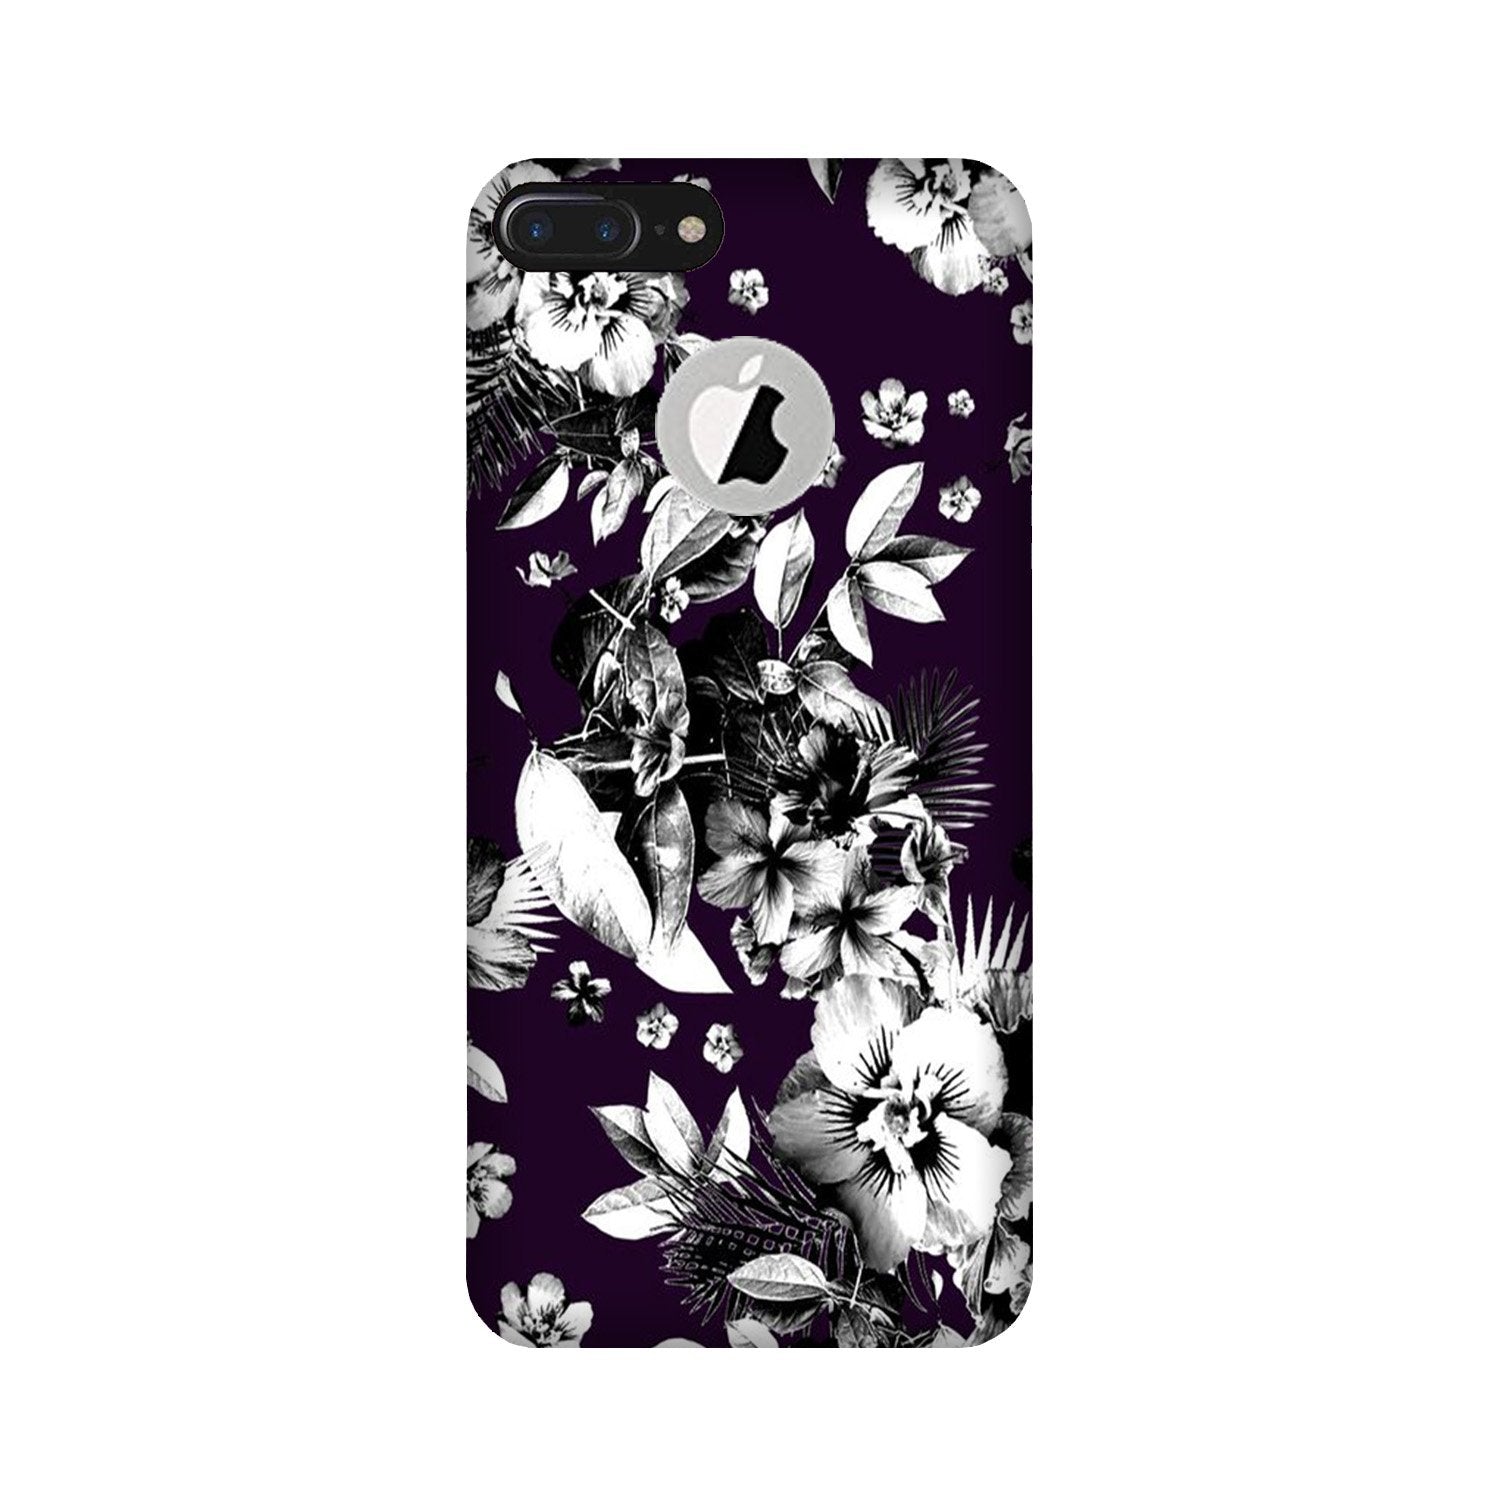 white flowers Case for iPhone 7 Plus logo cut